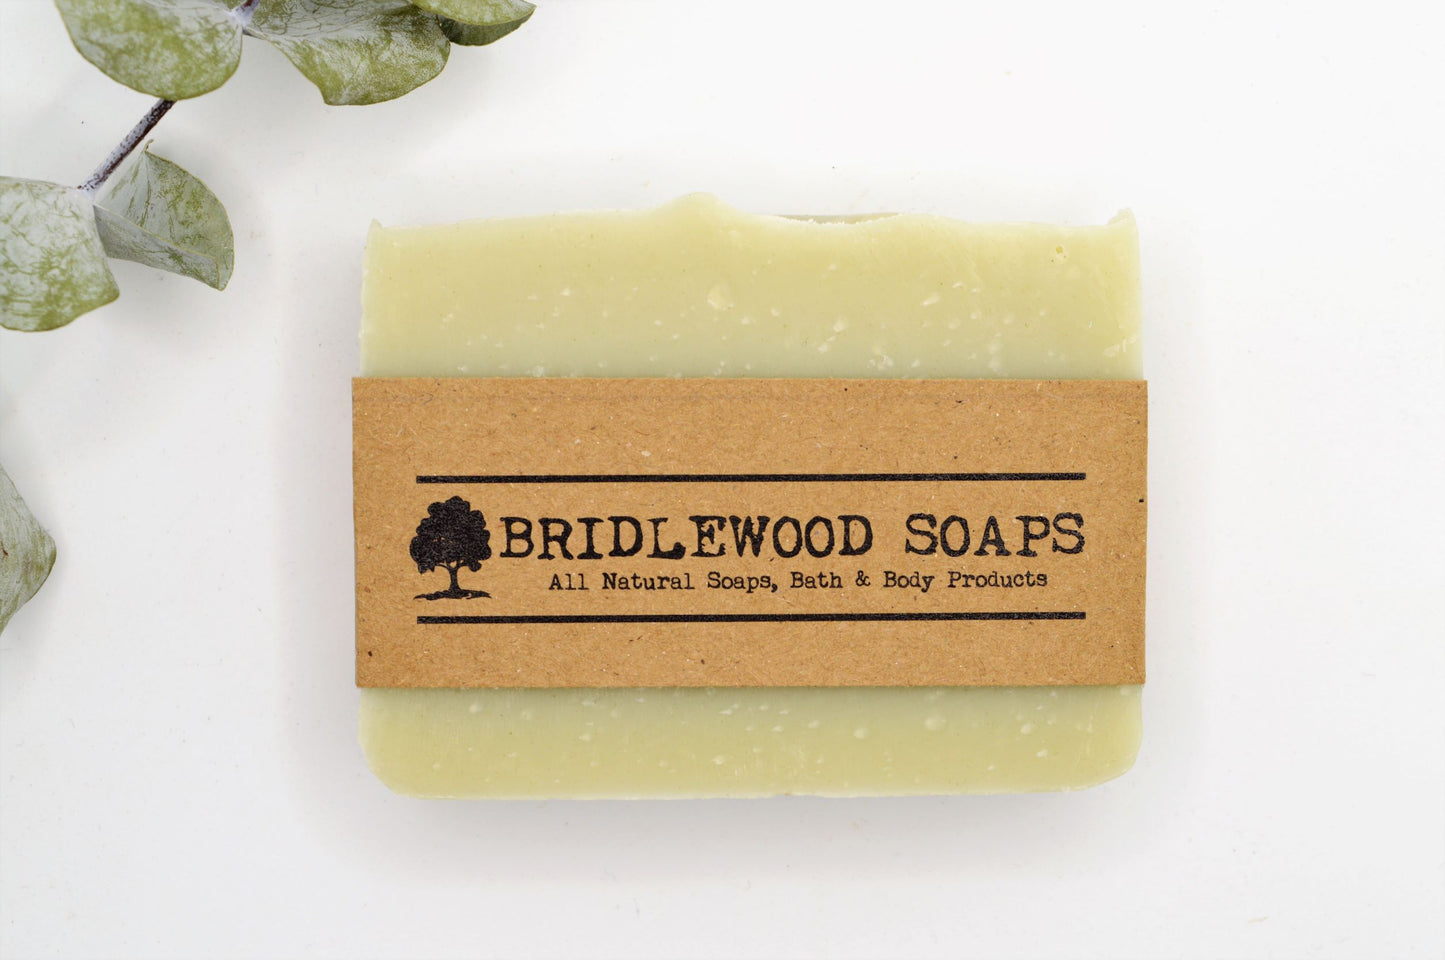 Mint Rosemary Soap Bridlewood Soaps